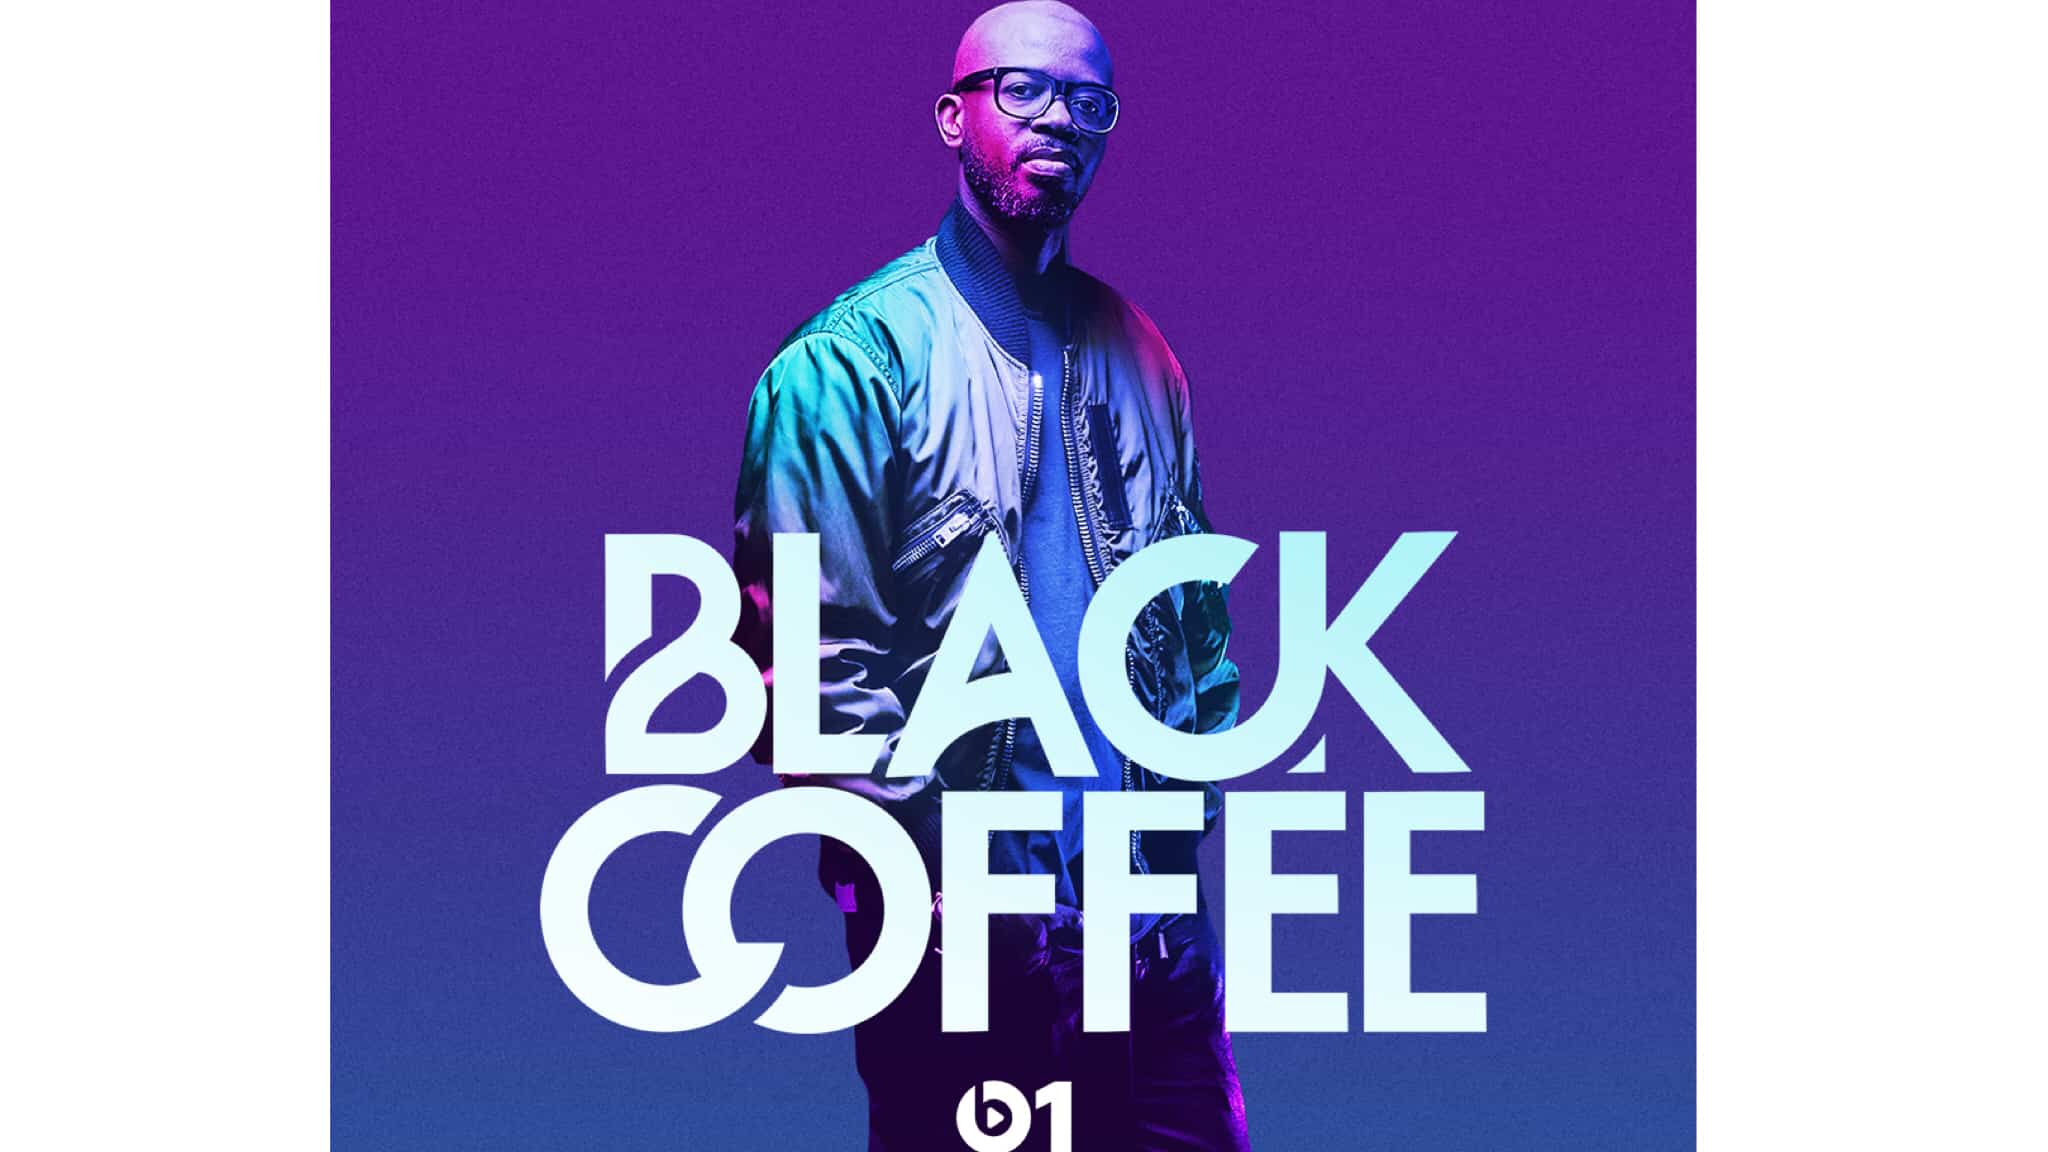 Hear Black Coffee talk African music and collaborations on Beats 1